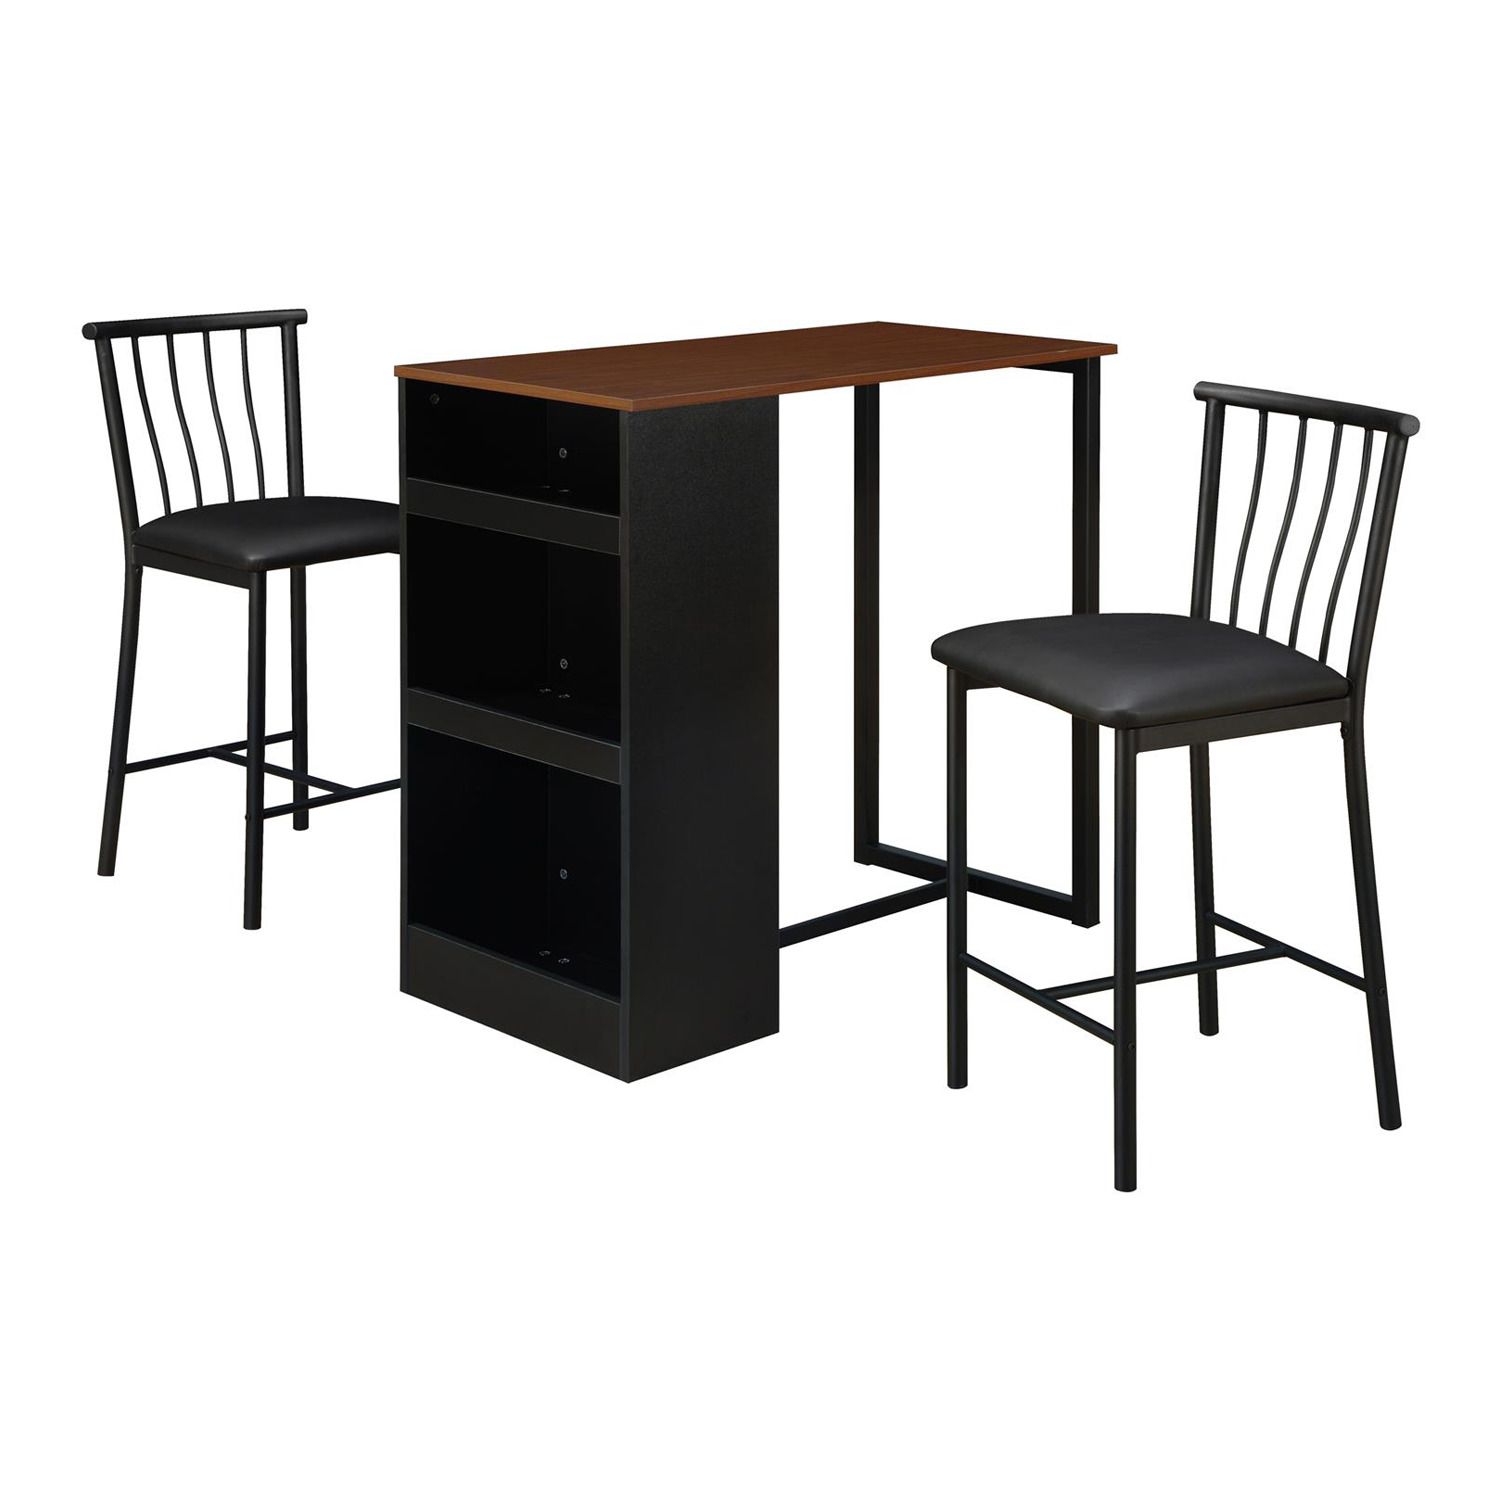 Image for Dorel Living 3-Piece Counter Height Bar Set at Kohl's.